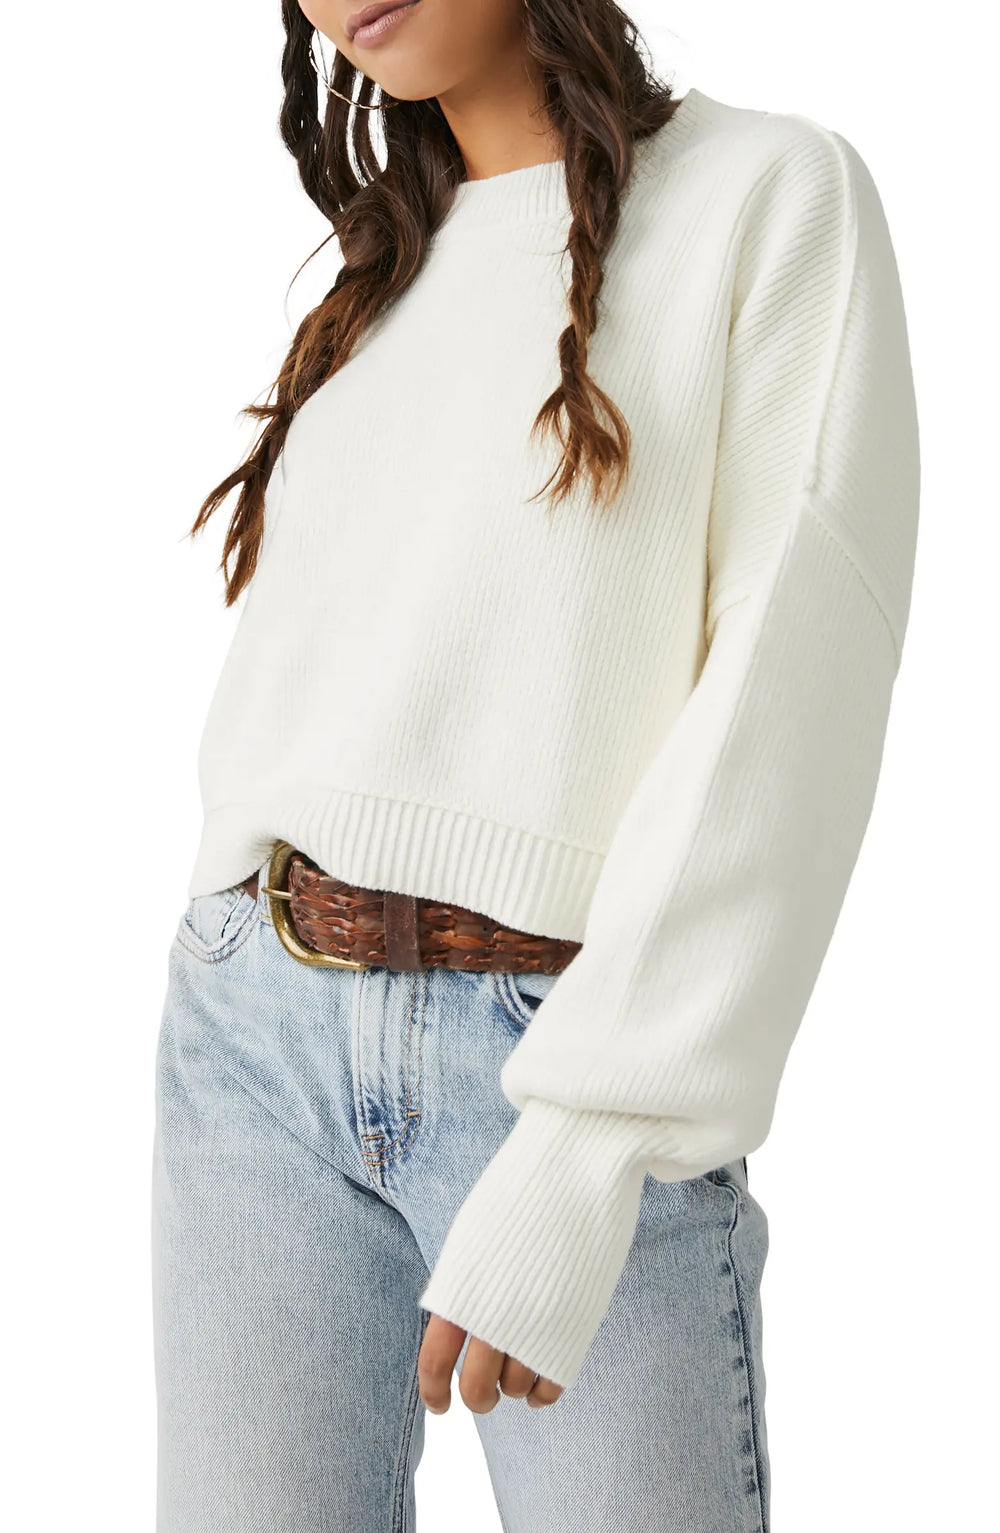 Easy Street Crop Pullover - Madison&